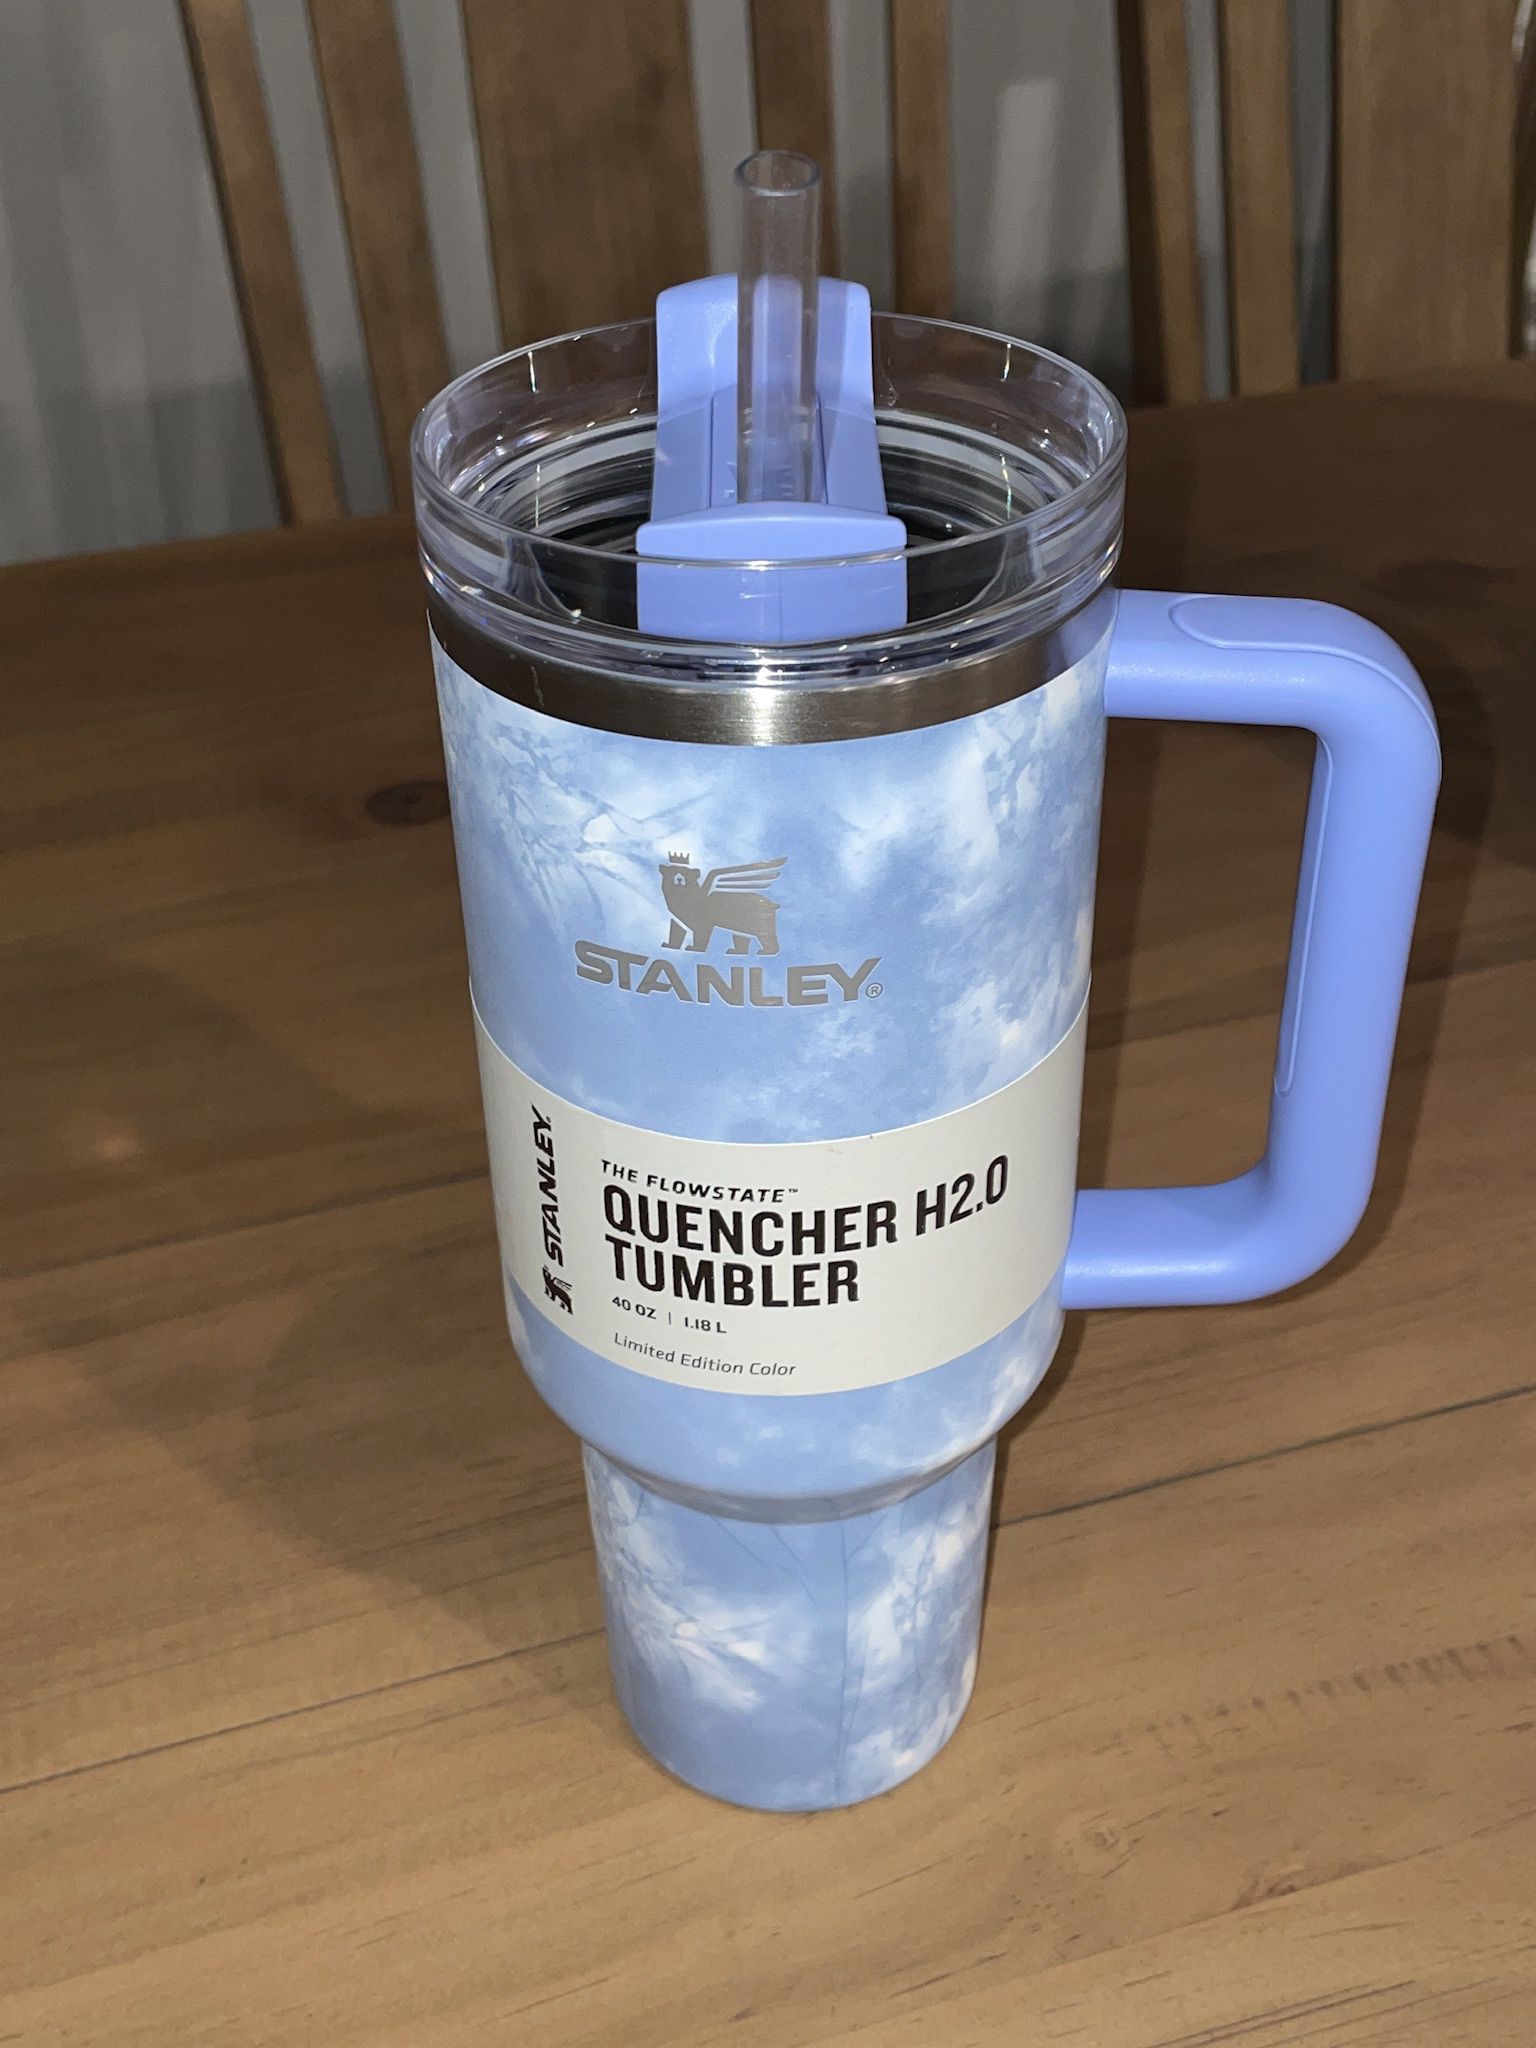 Today only: Take 25% off select Stanley tumblers at Target - Clark